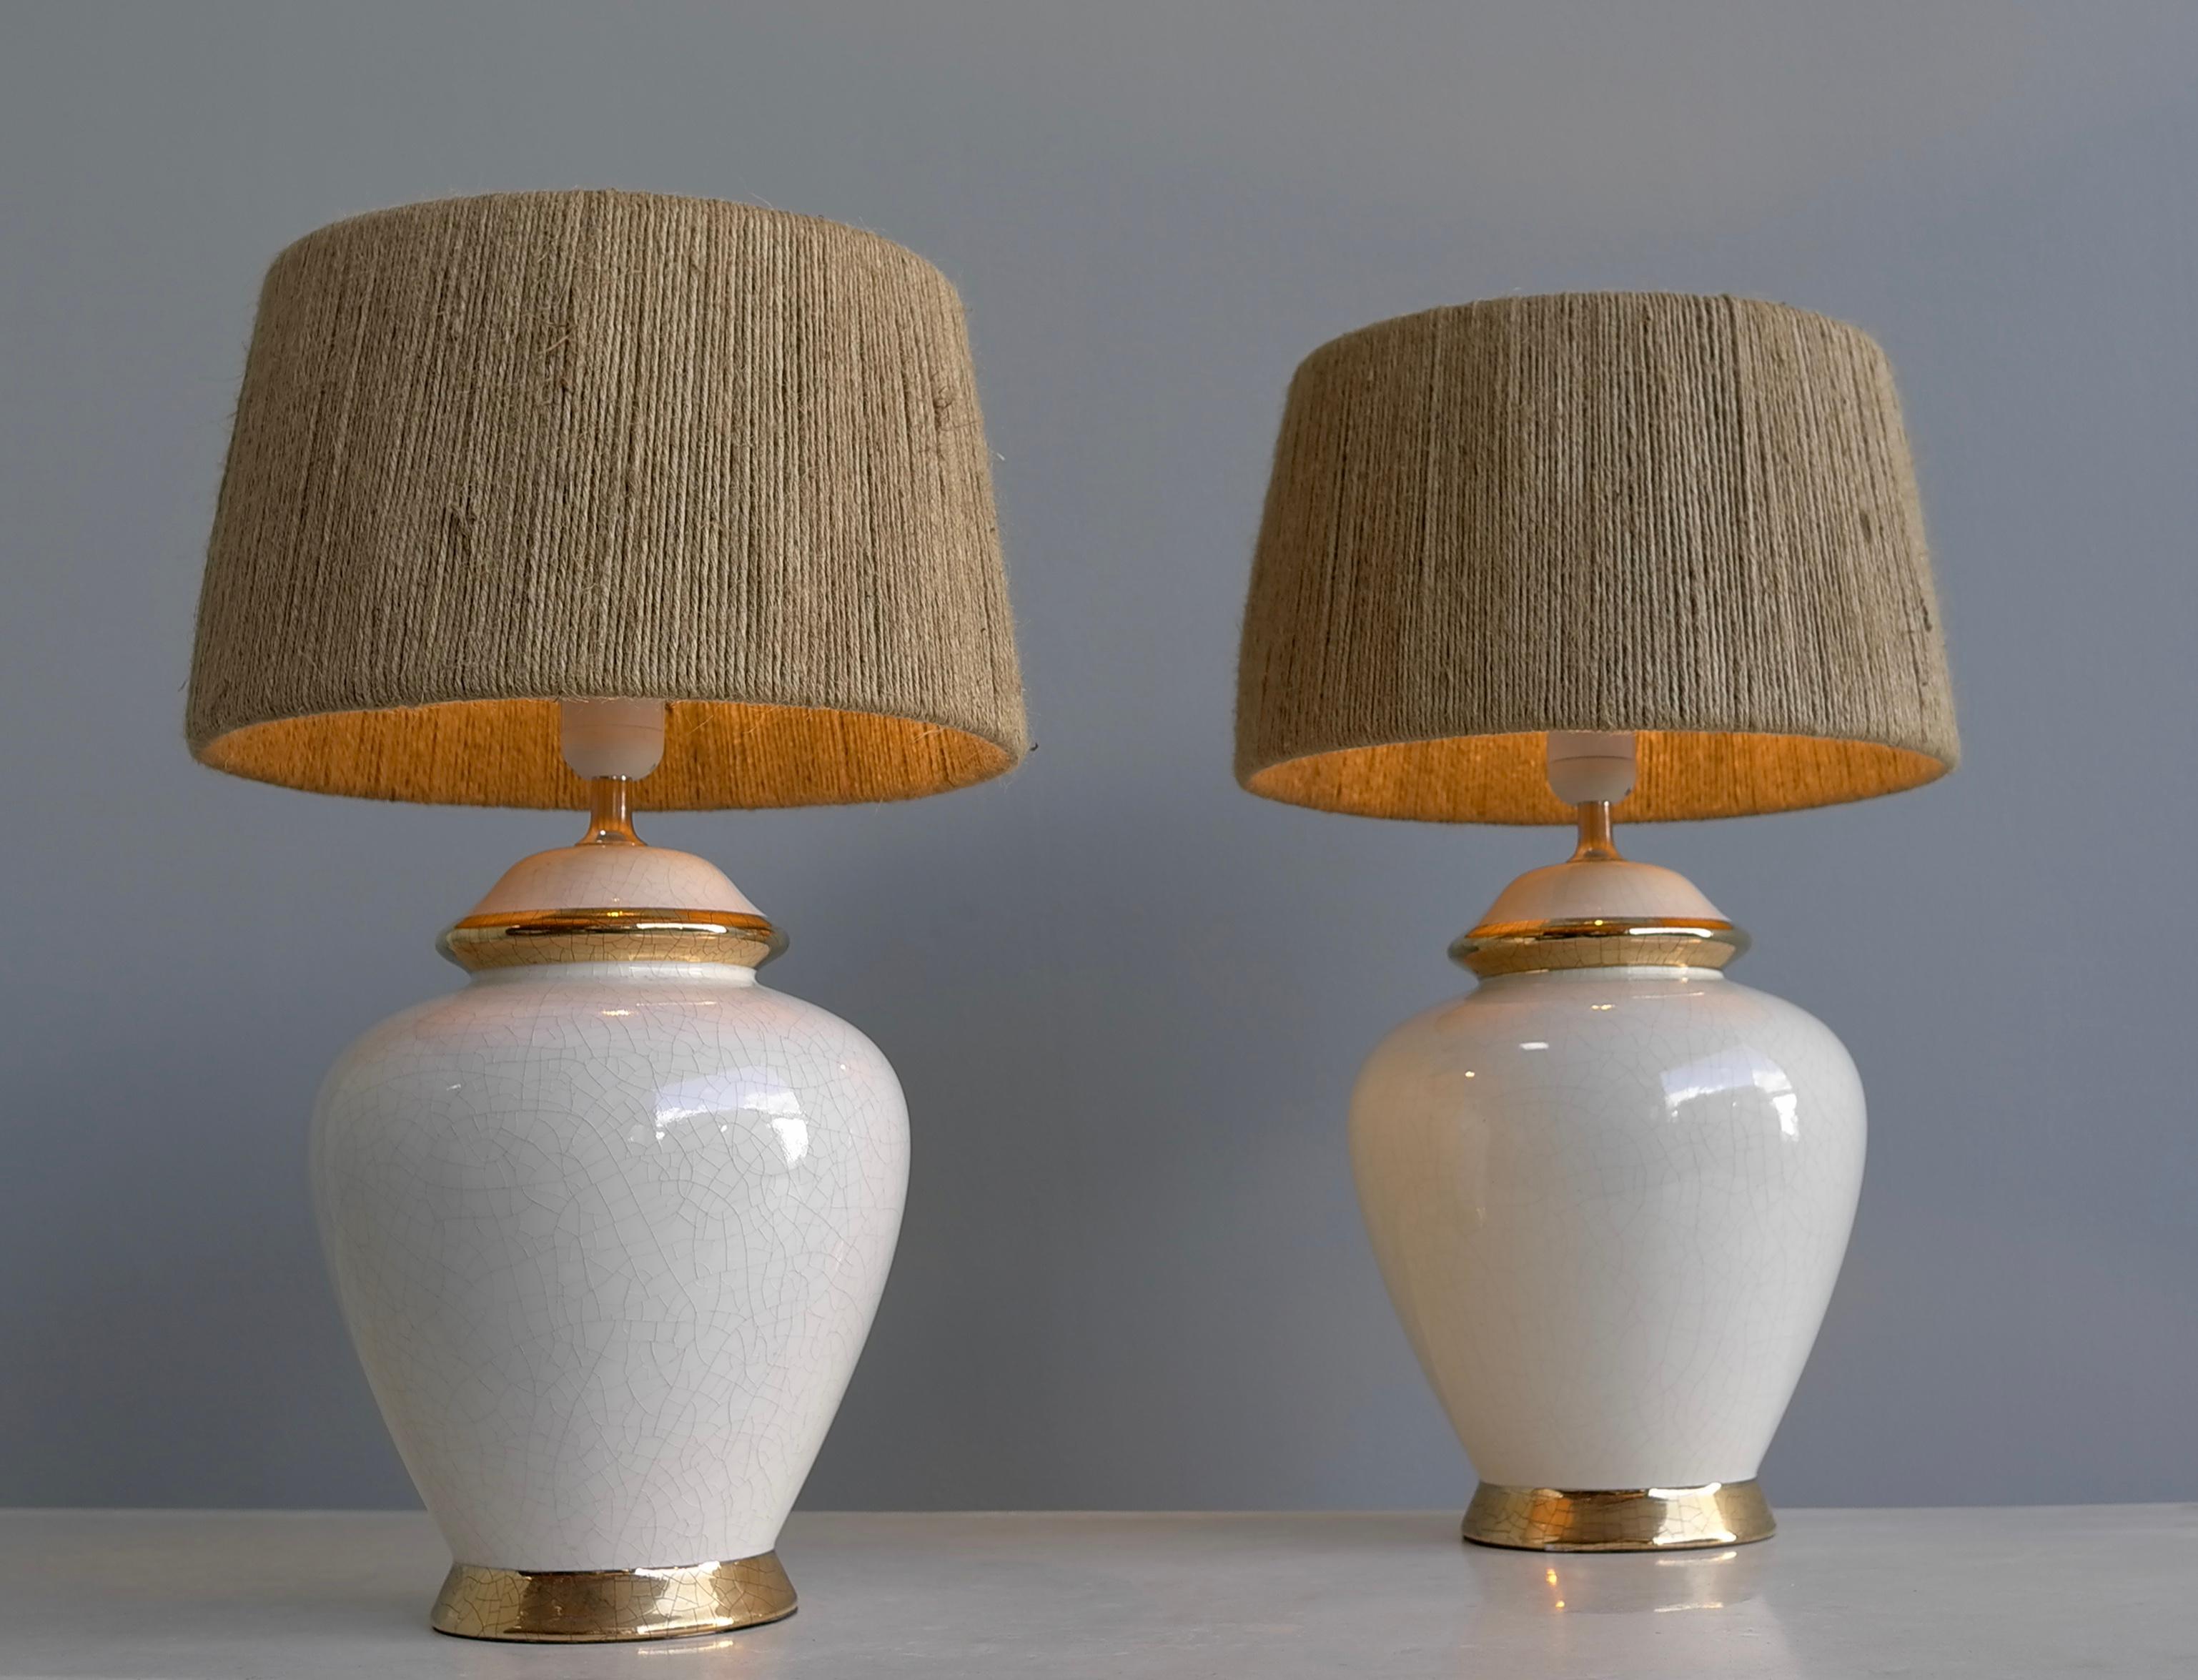 Pair of White and Gold Craquelure Glaze Ceramic French Lamps with Rope Shades  For Sale 1